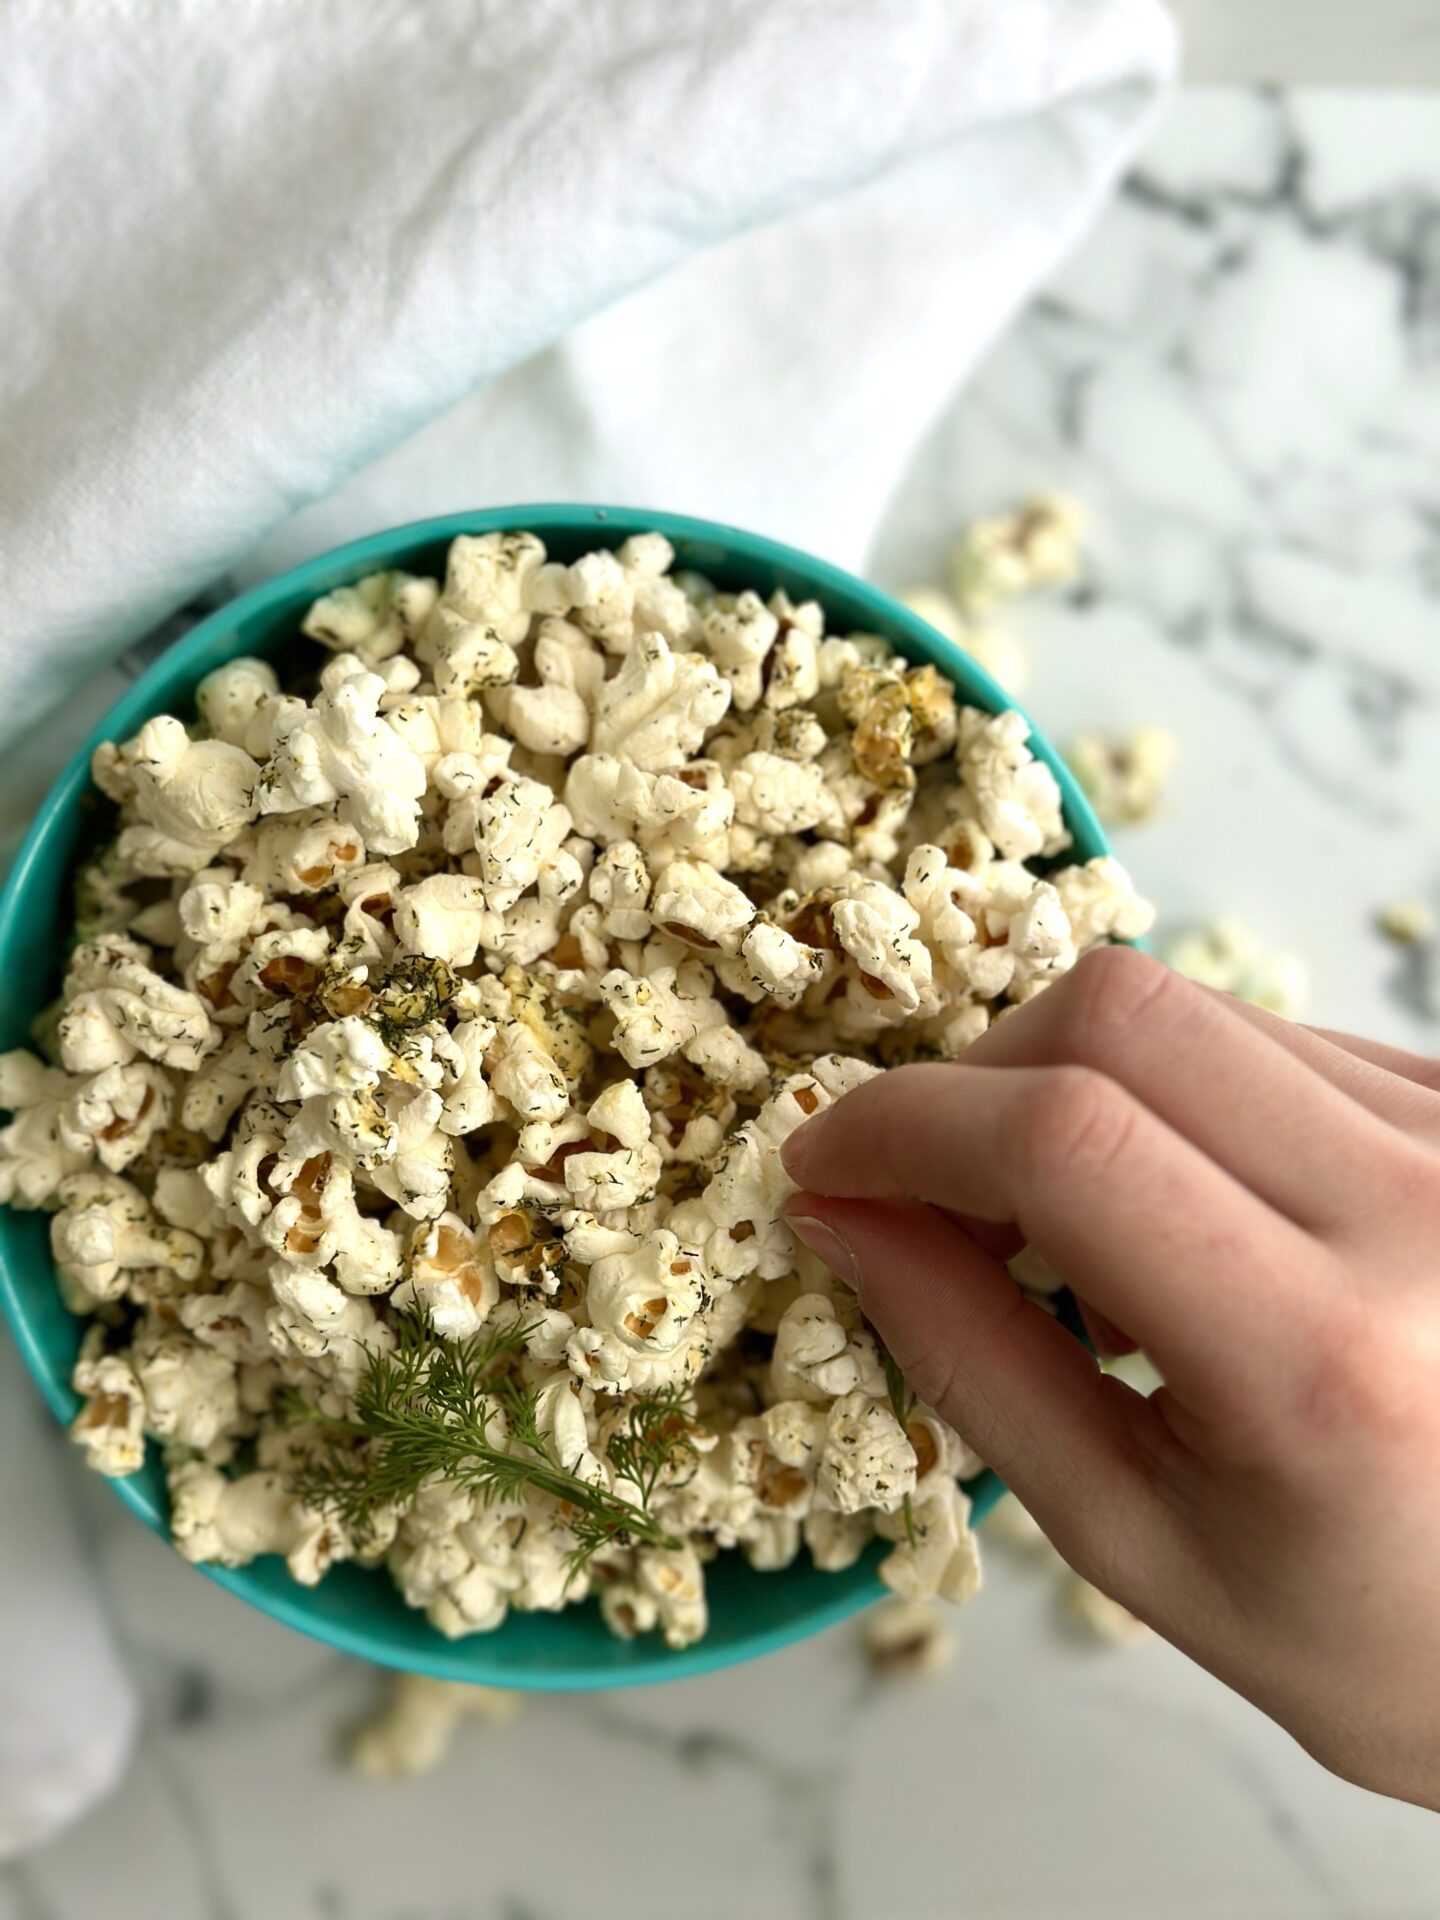 A bowl of dill pickle popcorn is seen from above with a small hand reaching in to grab a piece